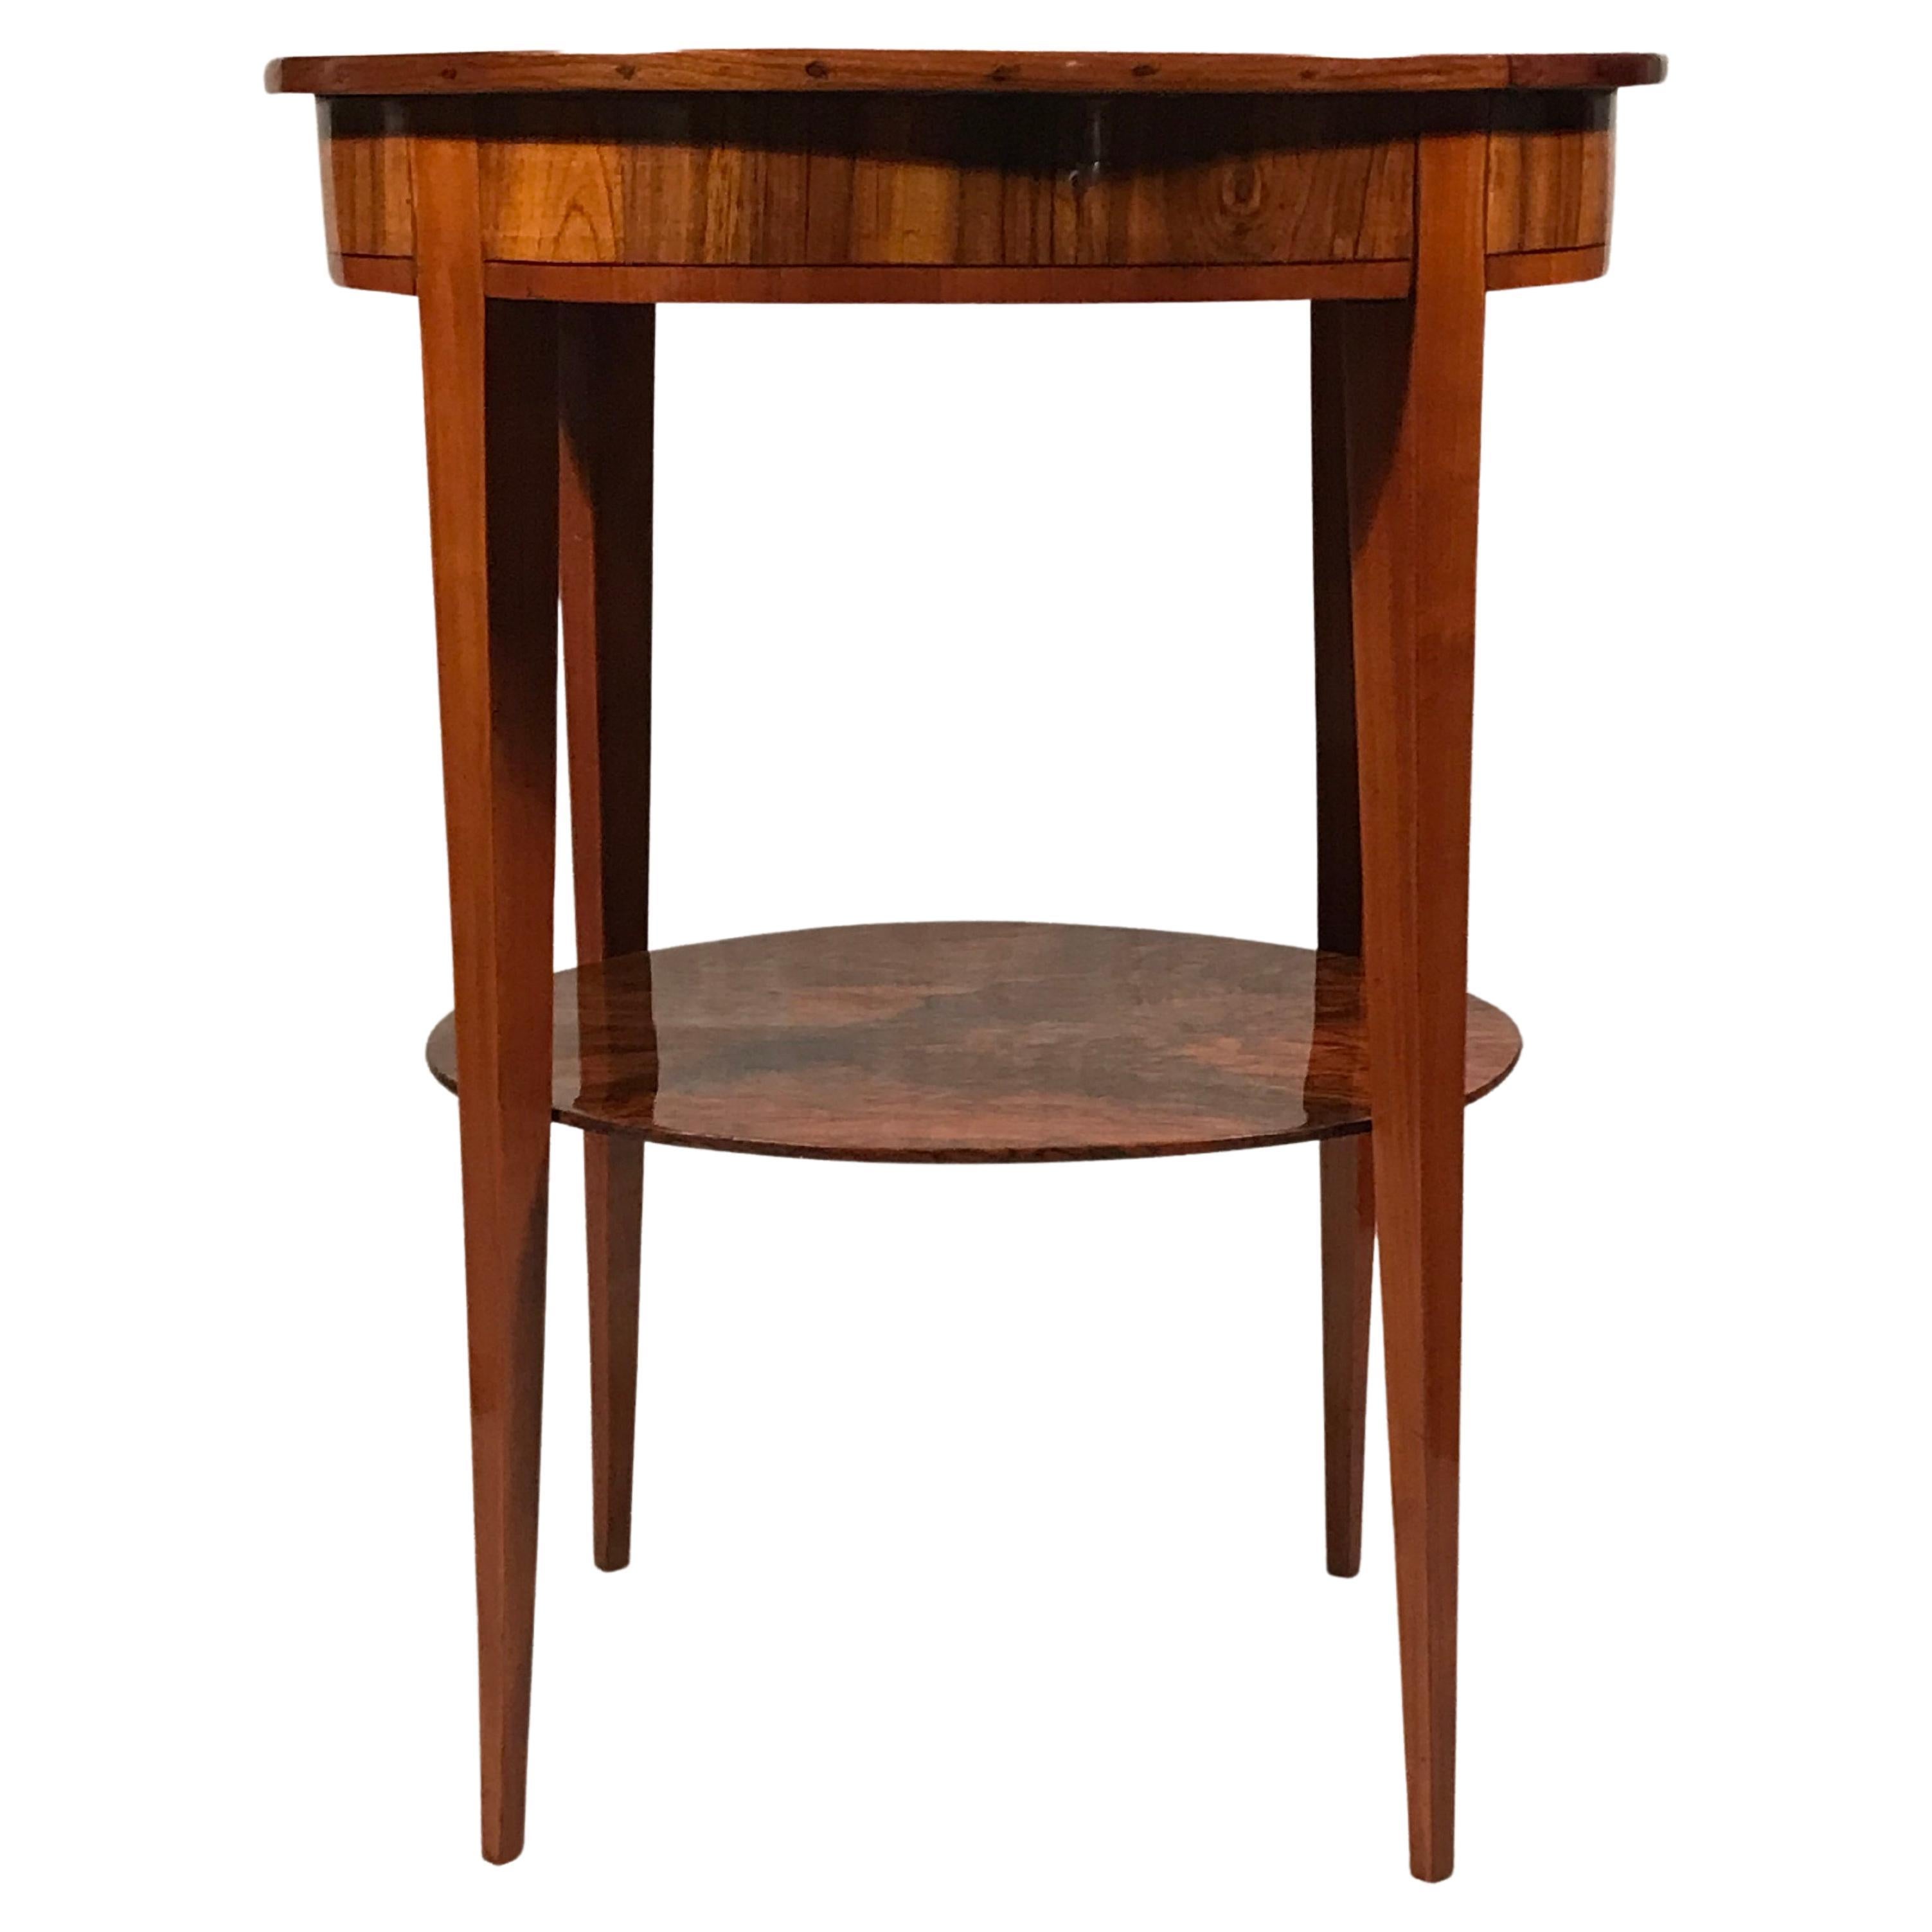 This exquisite Biedermeier side table dates back to 1815-20 and comes from southern Germany. The oval table has a gorgeous walnut veneer. The oval top with apron has additionally a darker wood ribbon inlay. The lower part of the table has an